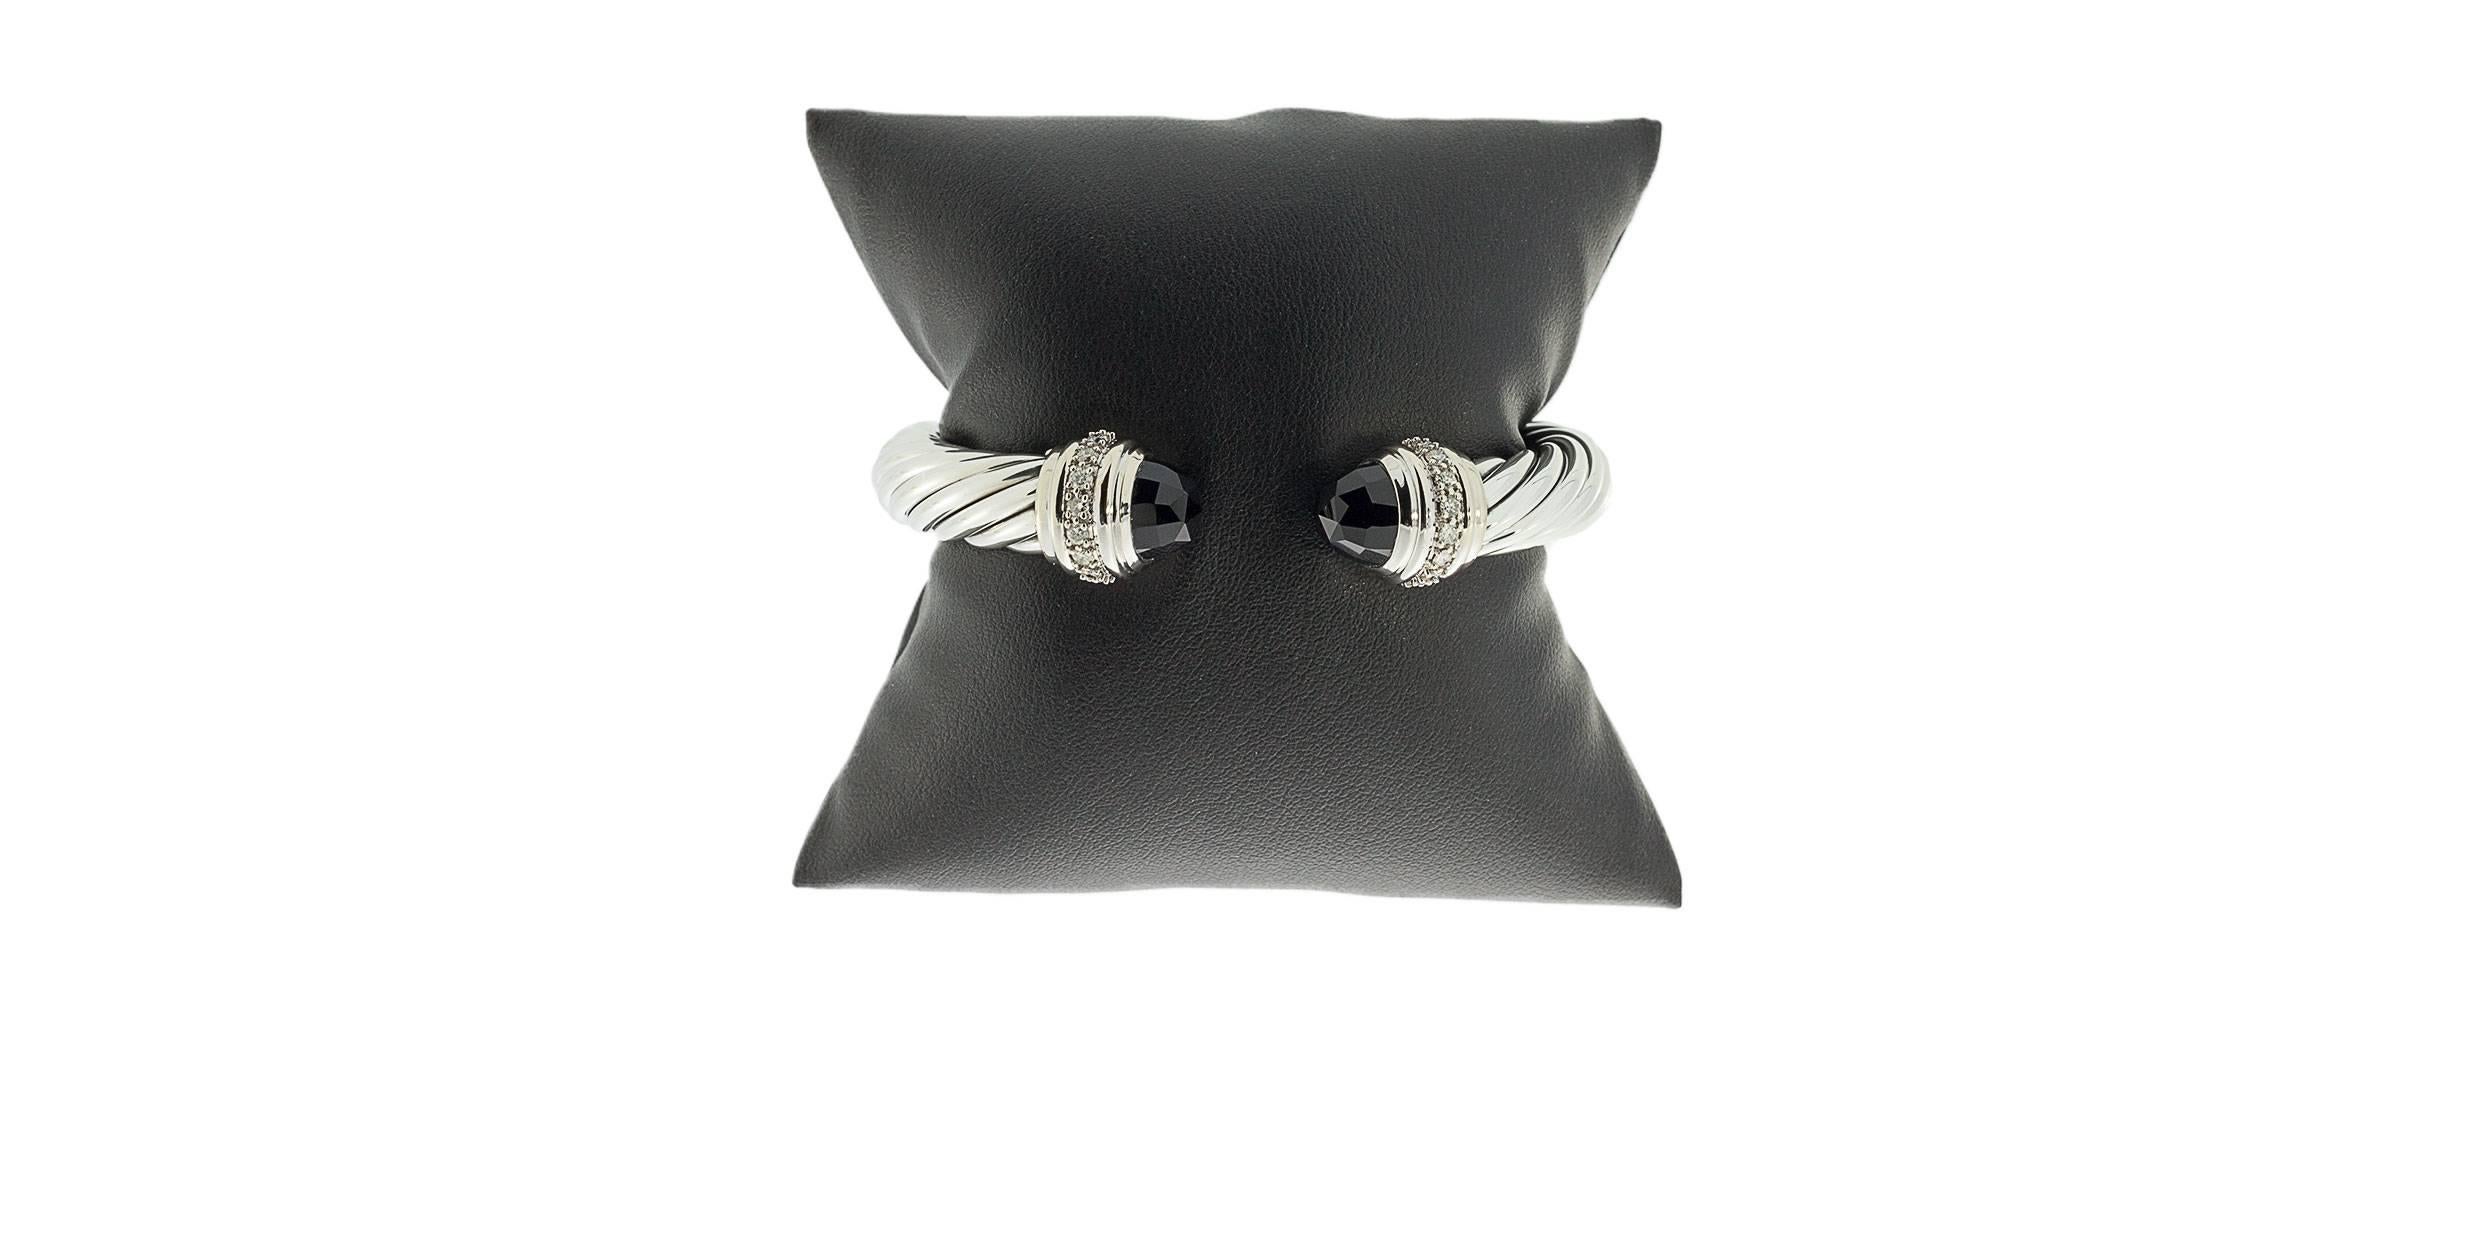 David Yurman's cable style jewelry has become his signature, the unifying element of every collection. This beautiful cuff bracelet features Yurman's iconic cable design in a 10mm width in sterling silver. The ends are capped with faceted black onyx